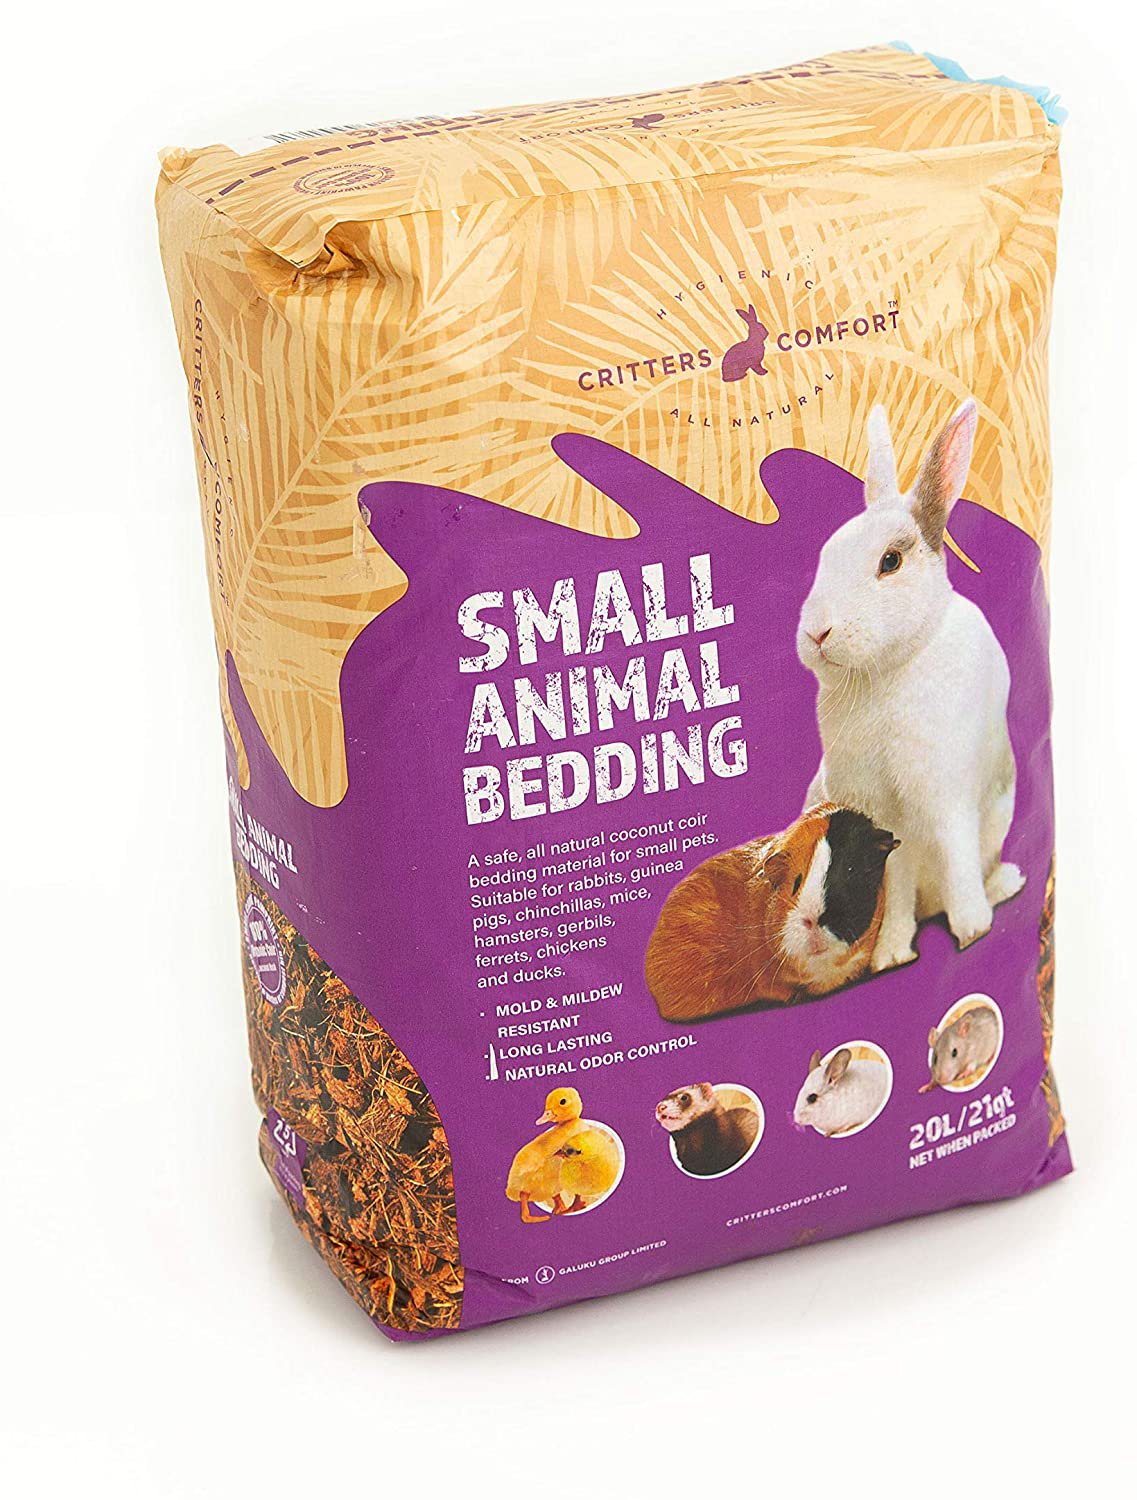 Bunny Bedding Odor Control for Small Pets - Organic Coconut Husk Fiber Substrate Animal Bedding for Guinea Pig, Ferret, Hamster Cages and Habitats - Pet Accessories - 20 Liters Critter Litter